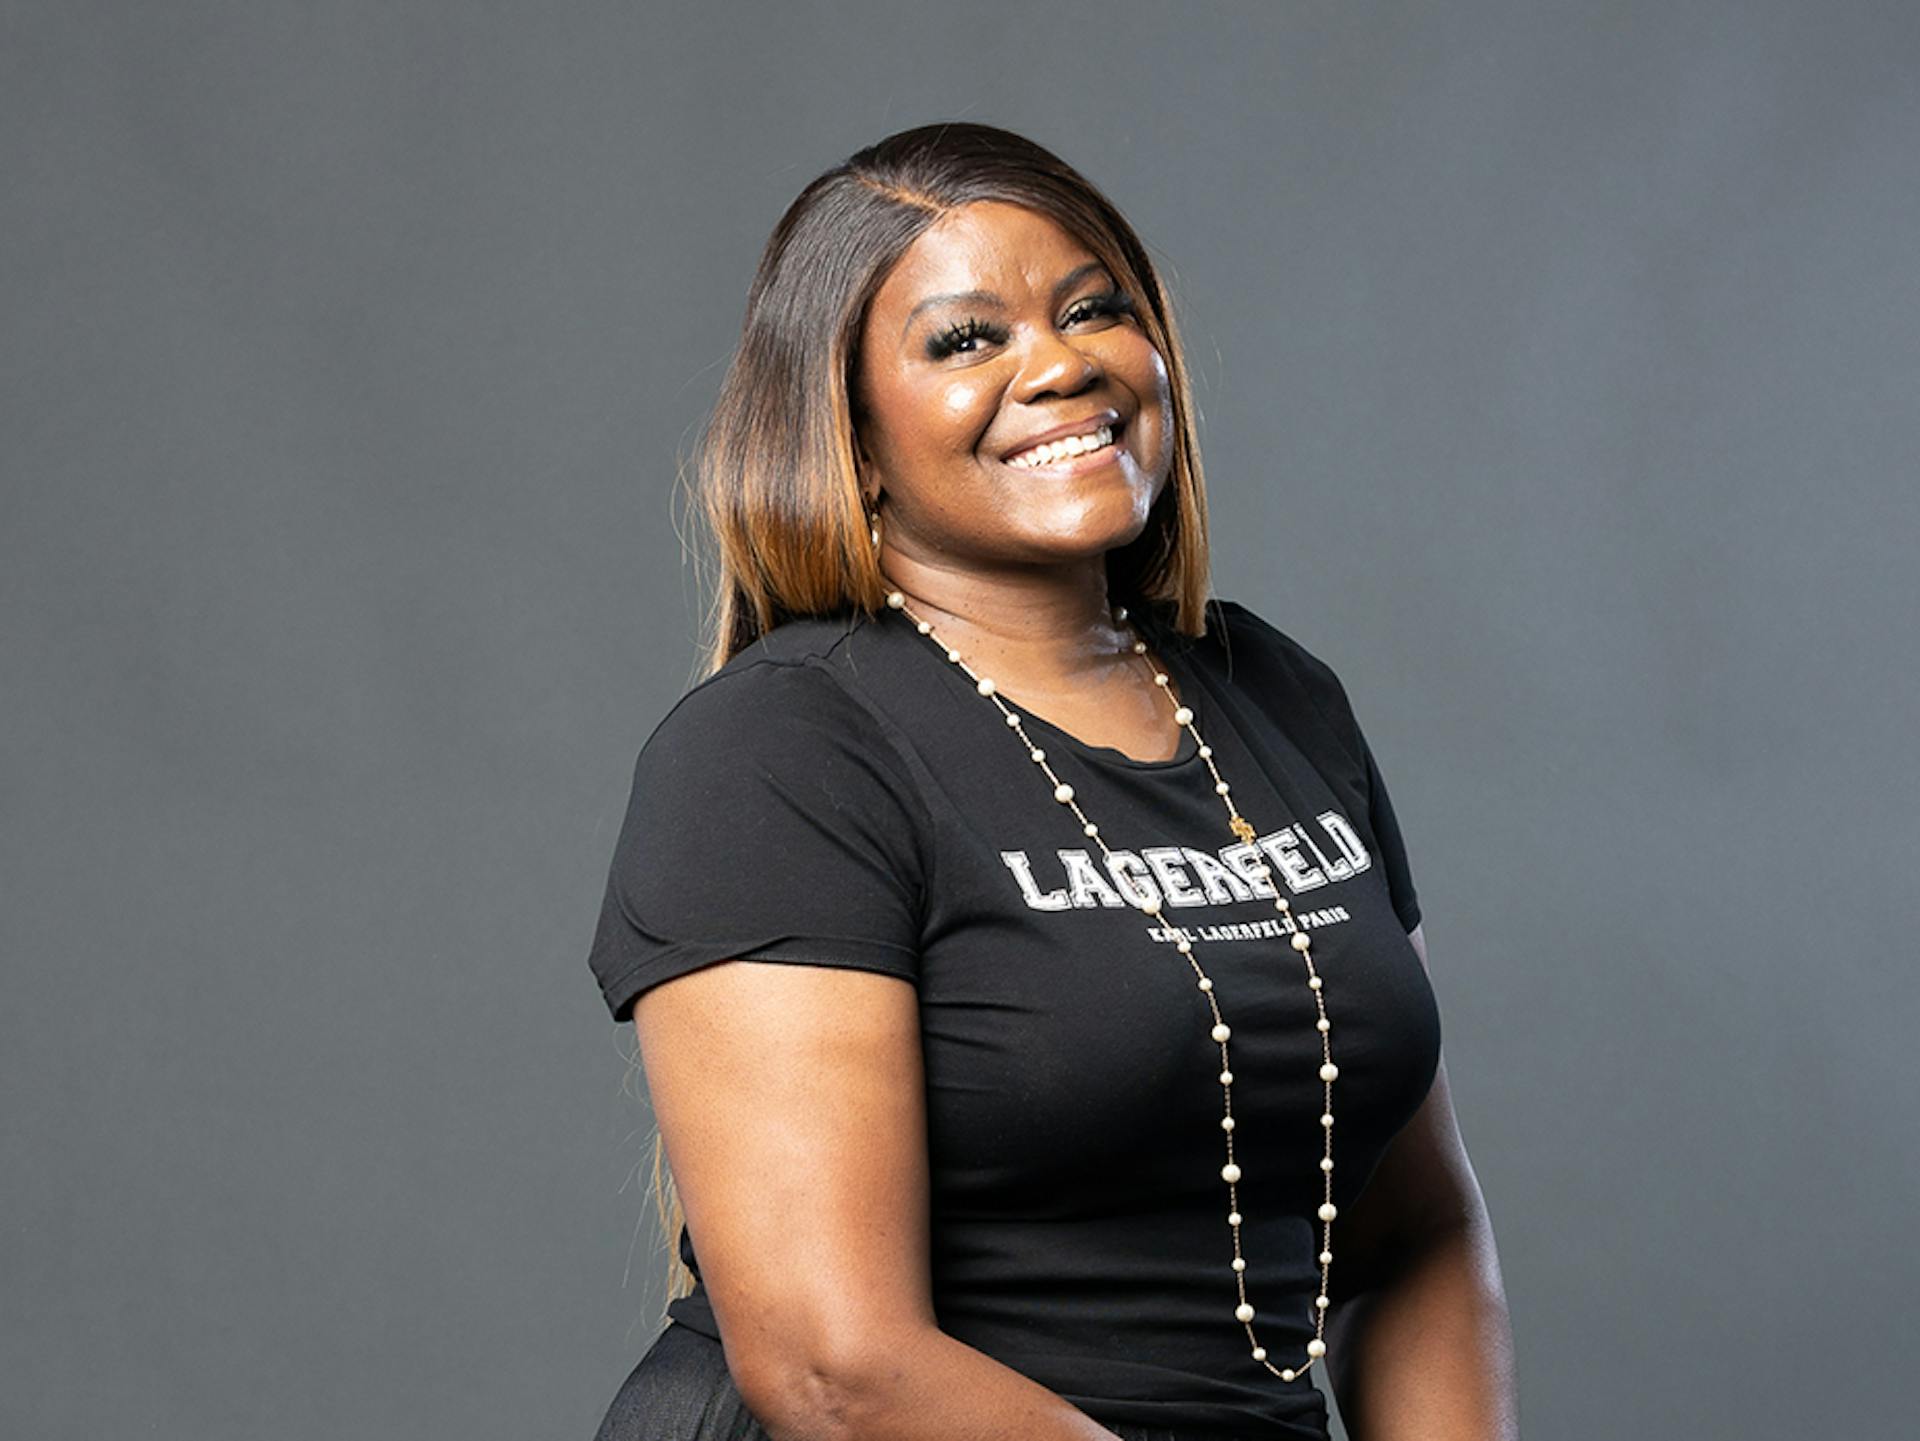 Not A Basketball School': Lady Raiders ride Sheryl Swoopes to title